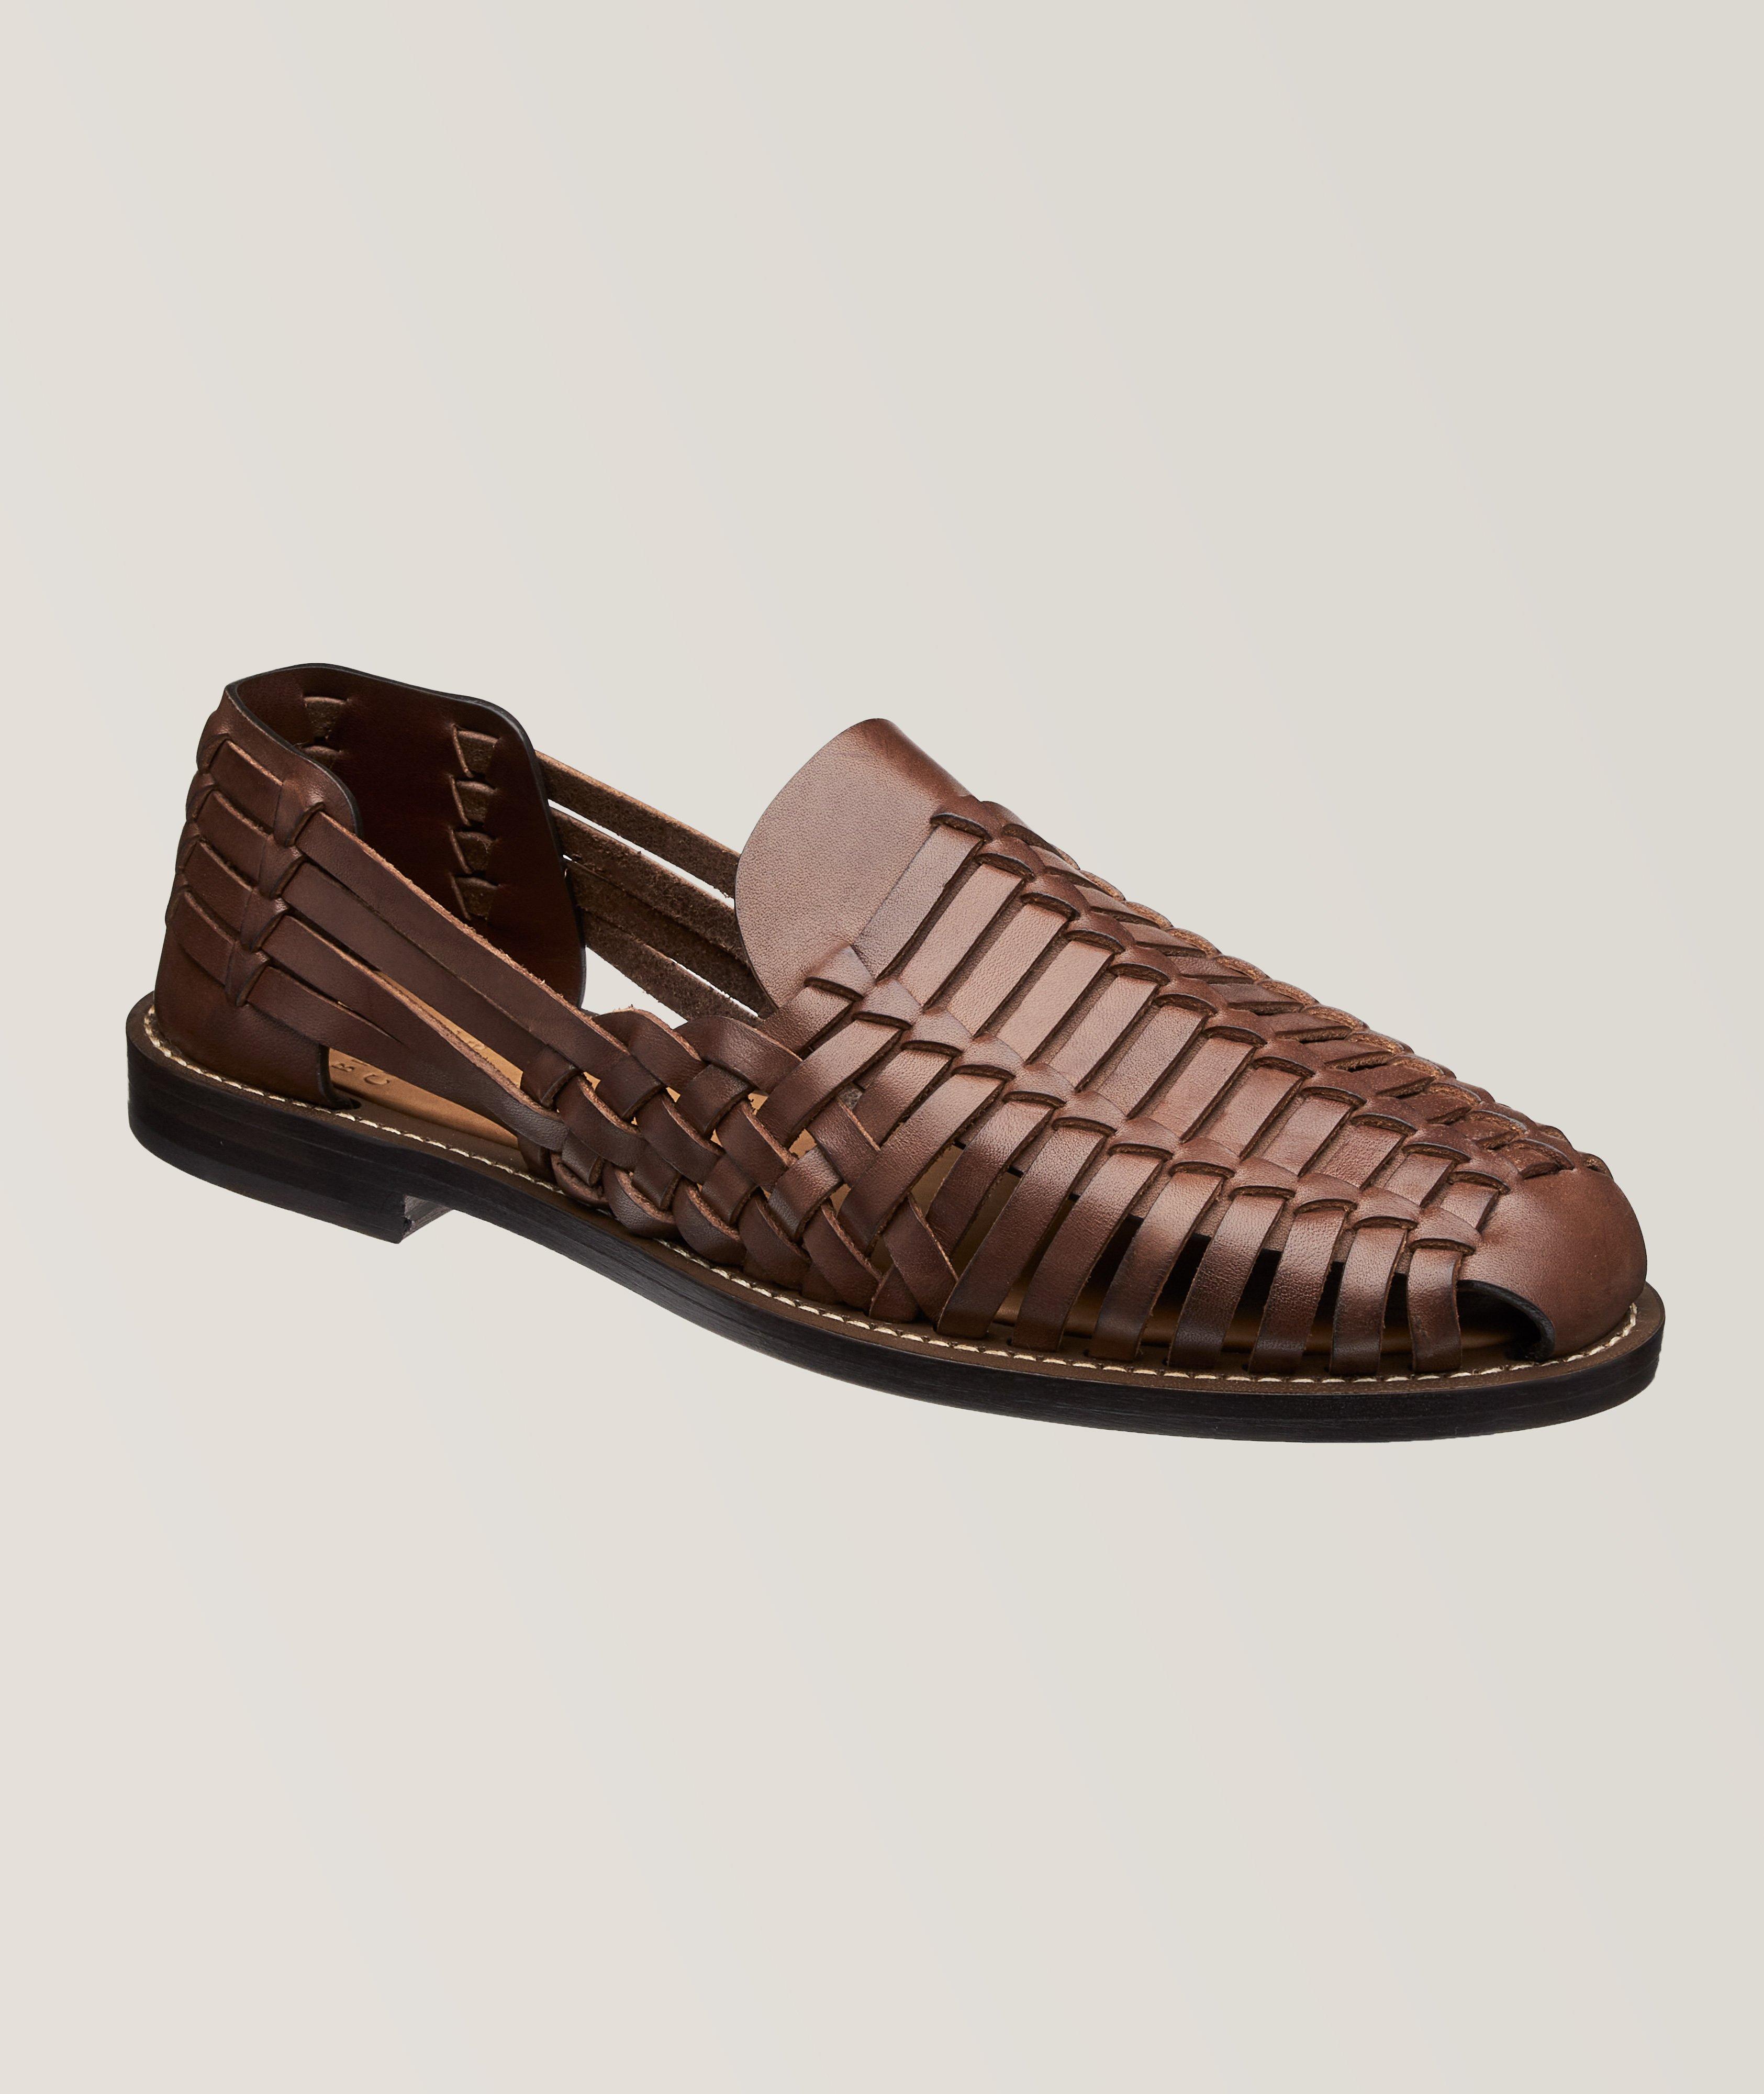 Woven Leather Fisherman Sandals